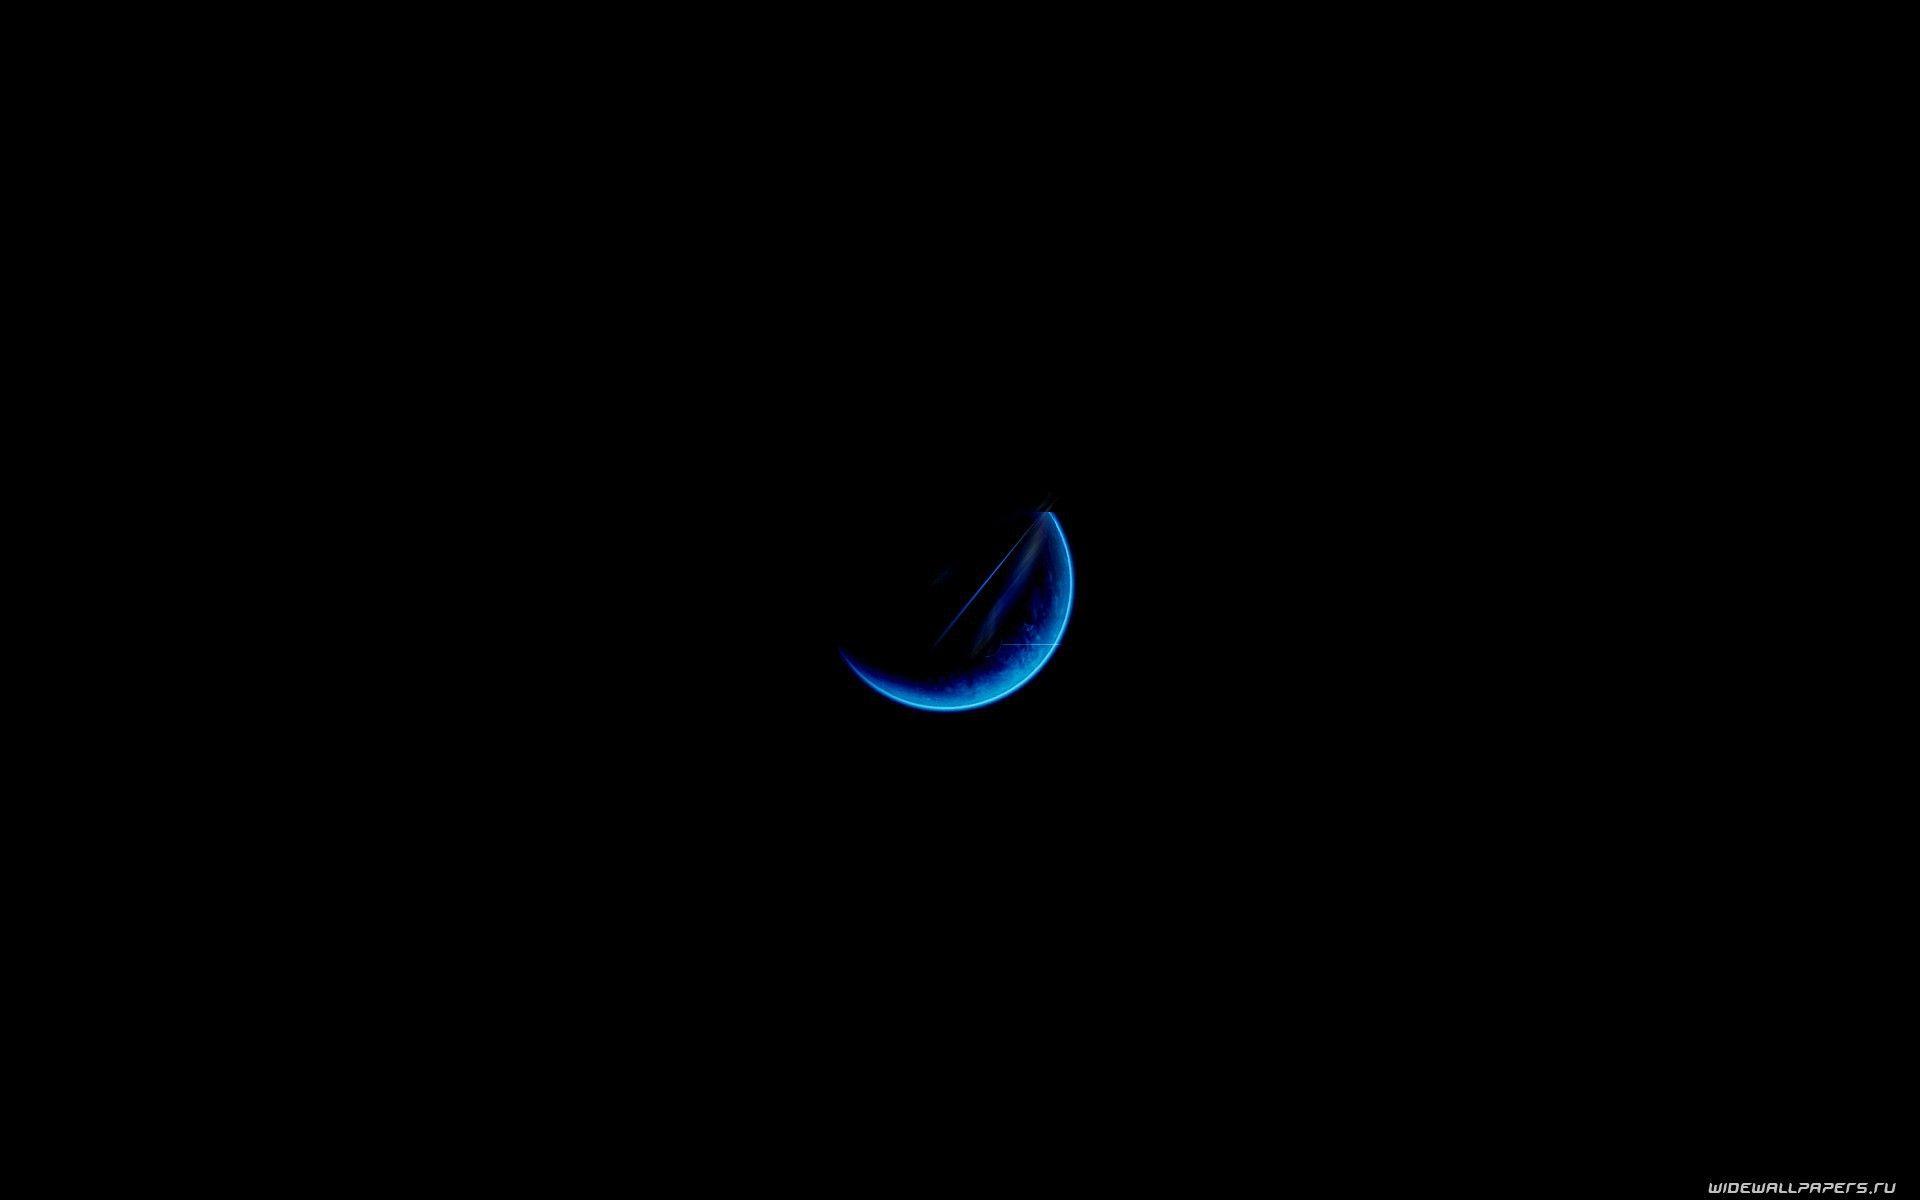 Half a blue moon on a black background wallpaper and image